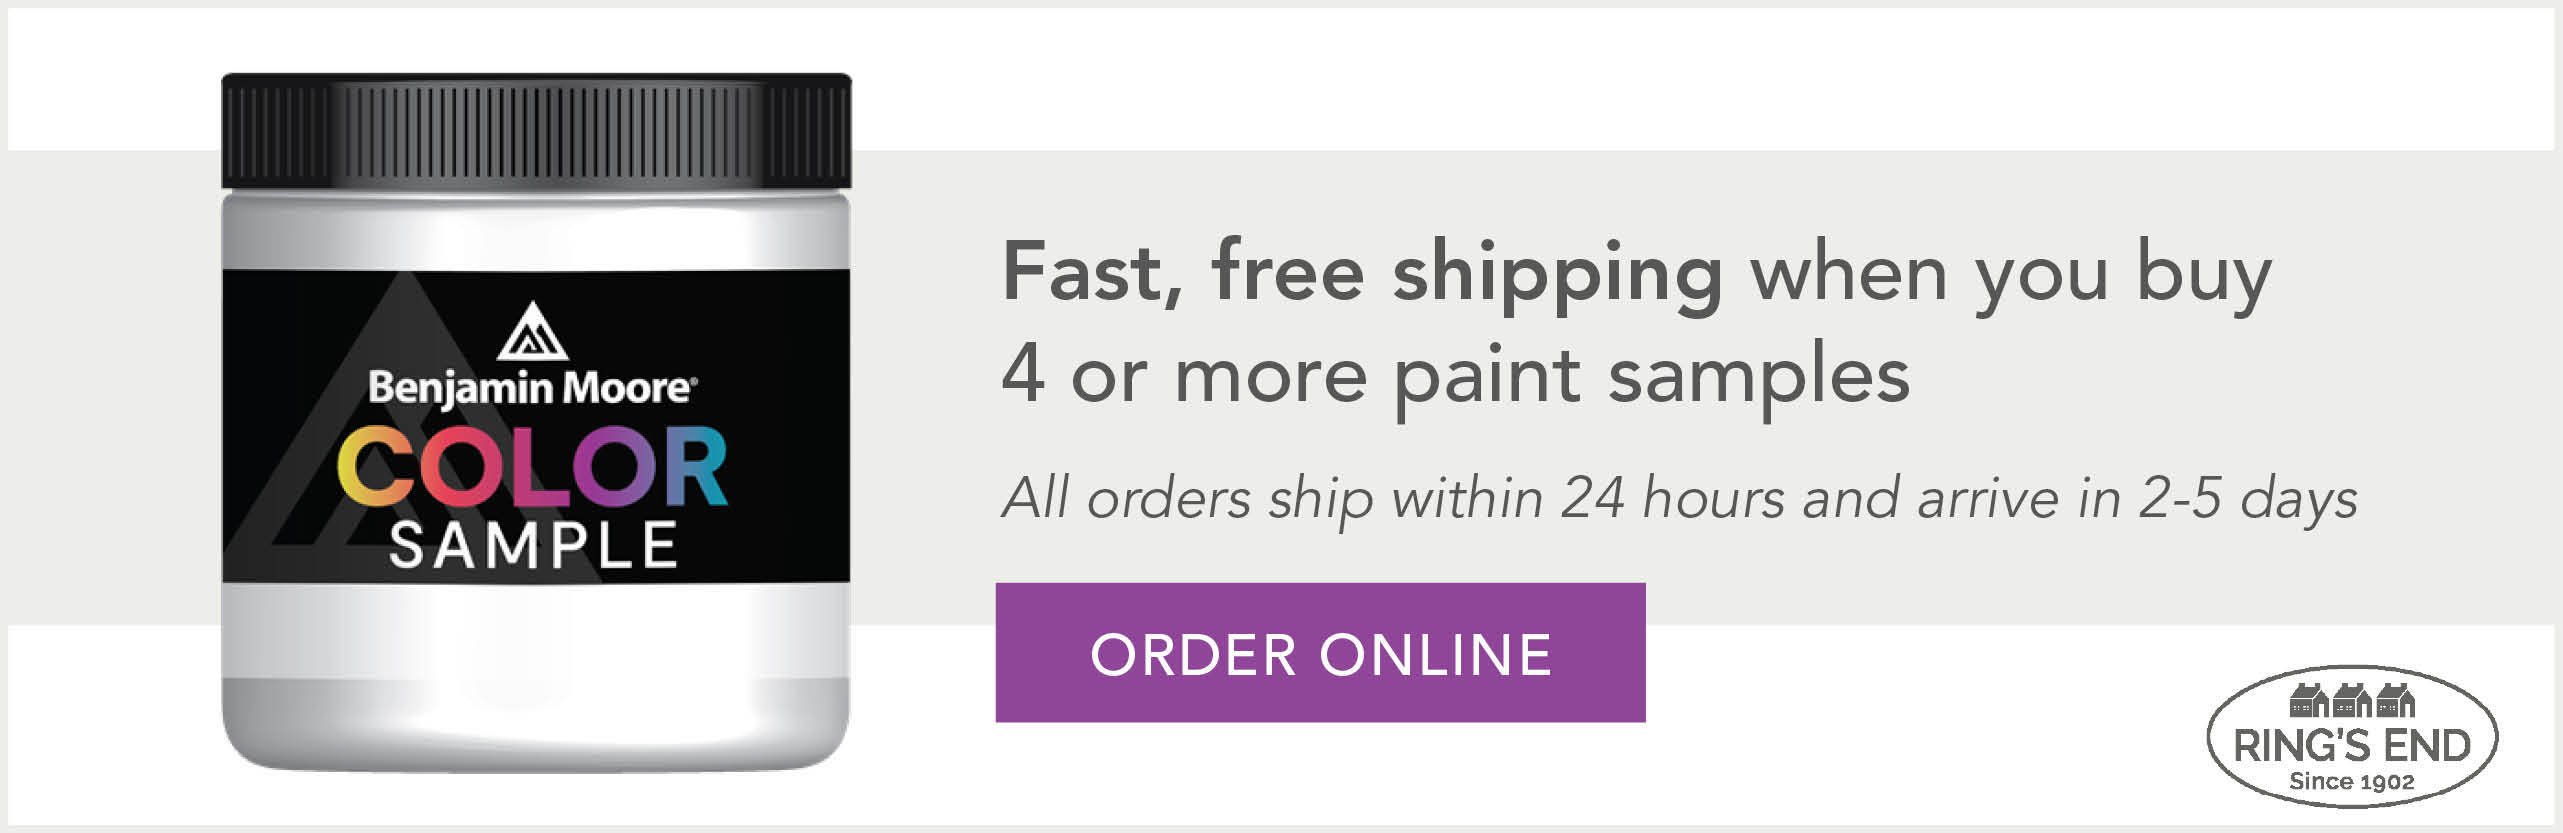 free shipping on benjamin moore paint samples